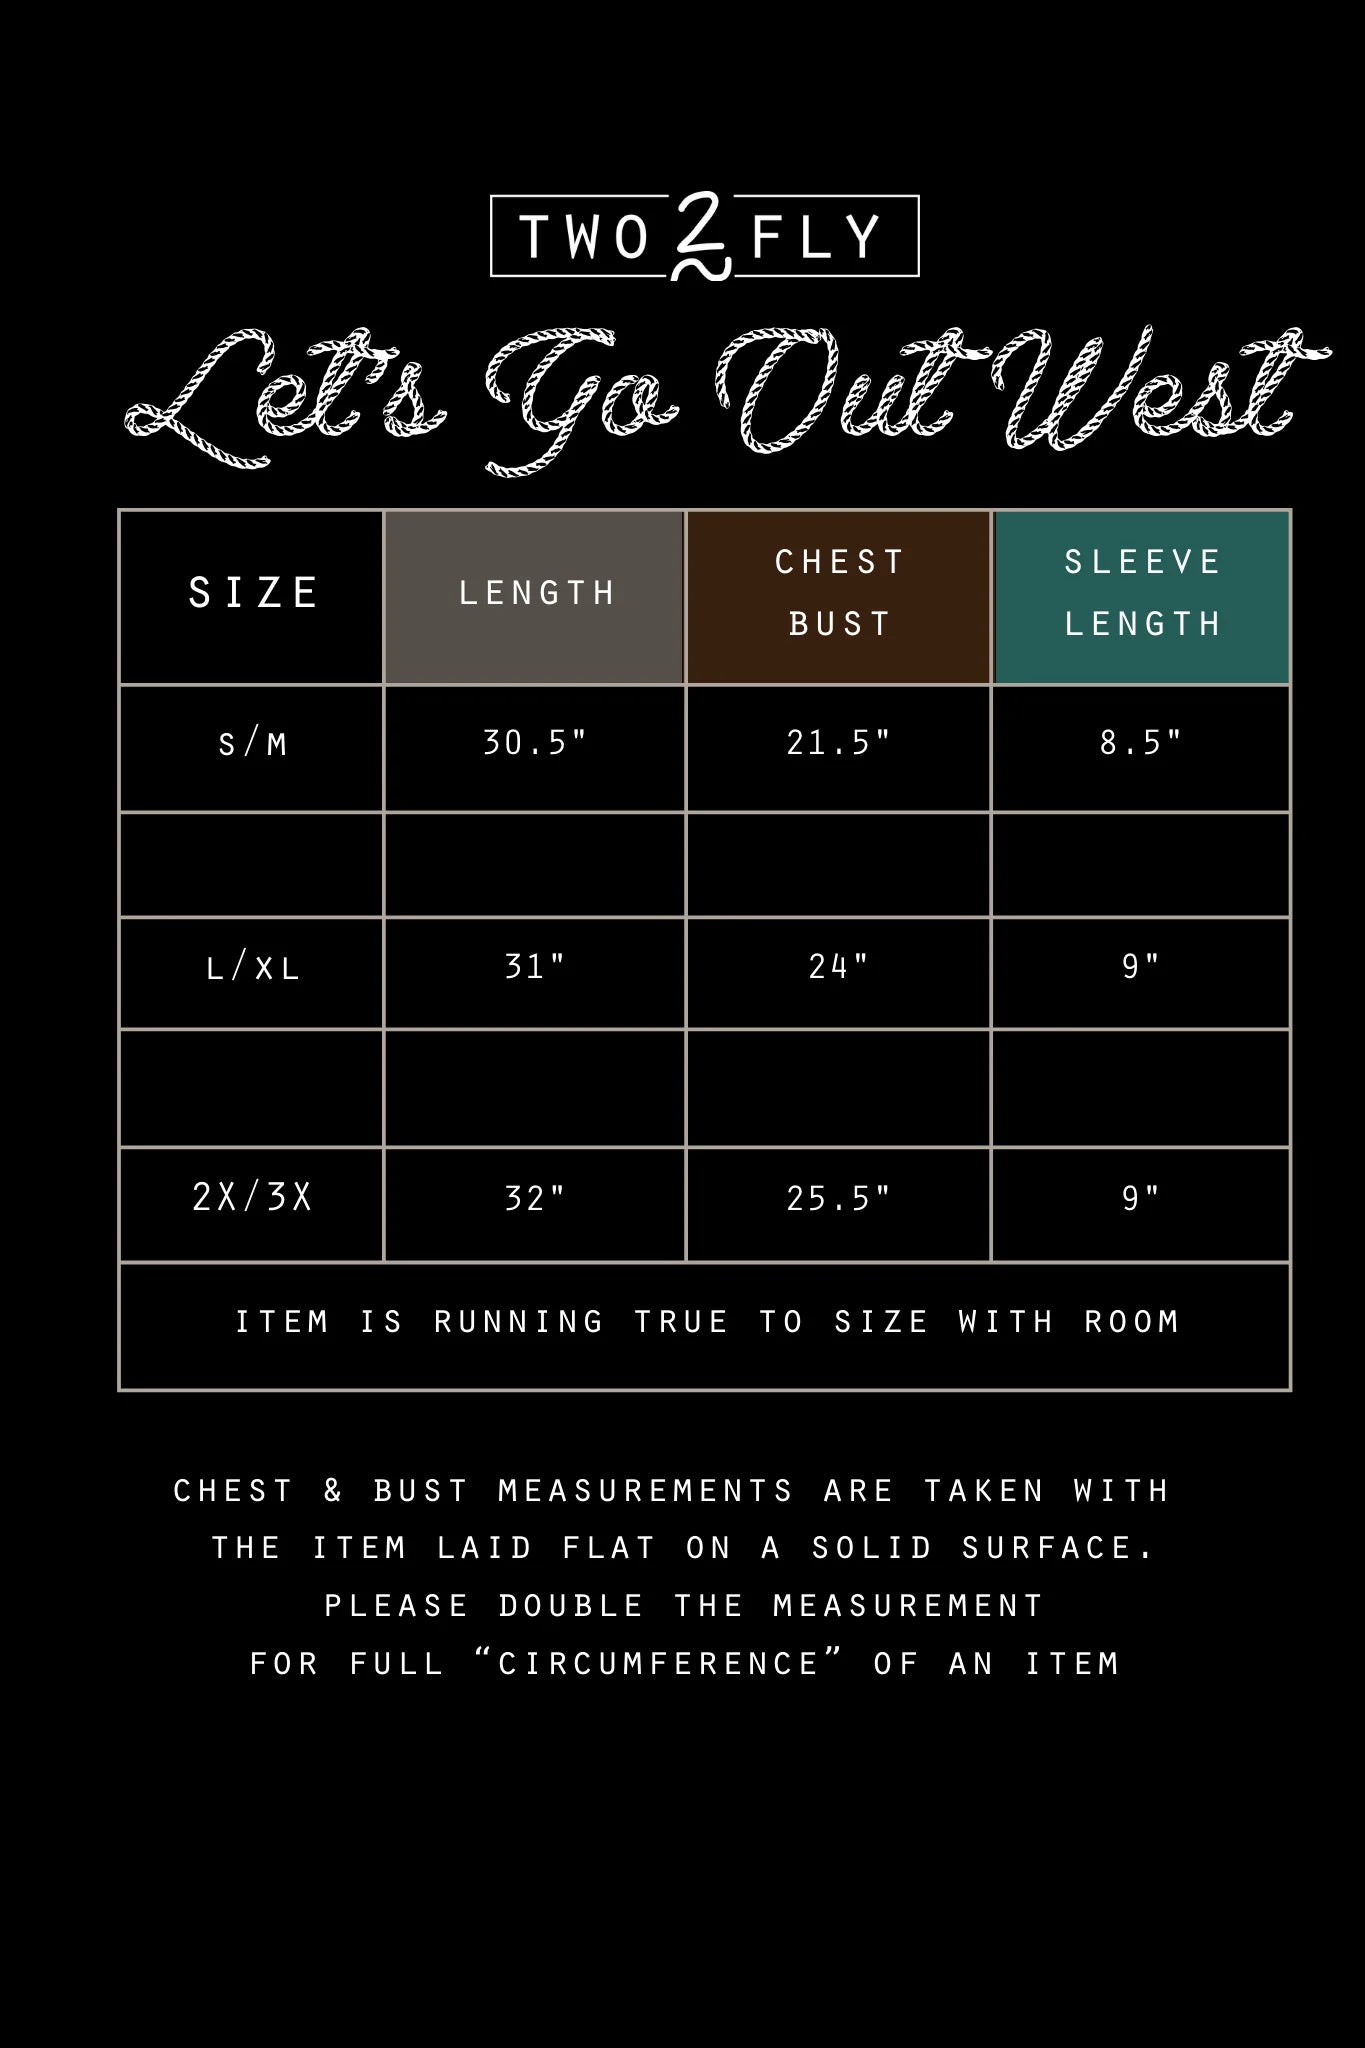 The Let's GO out West Top